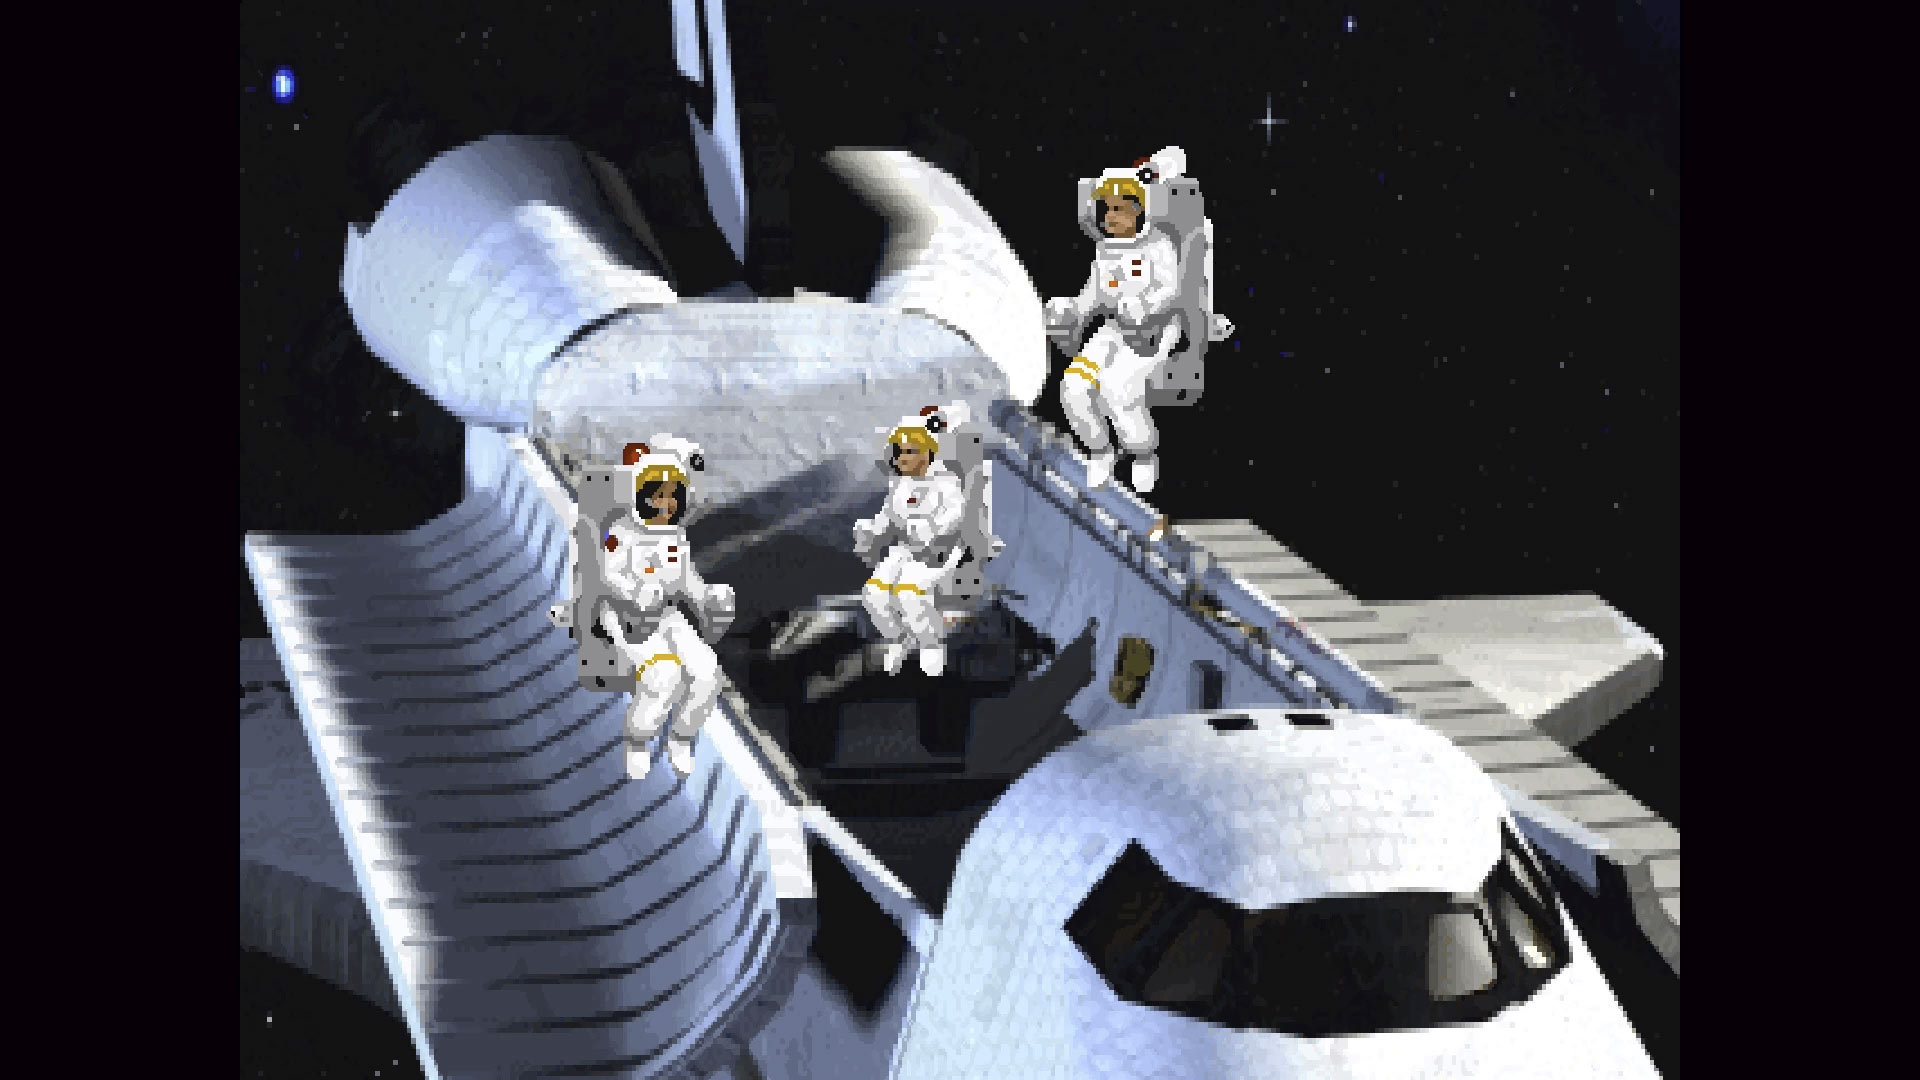 Astronauts outside a space shuttle in The Dig.